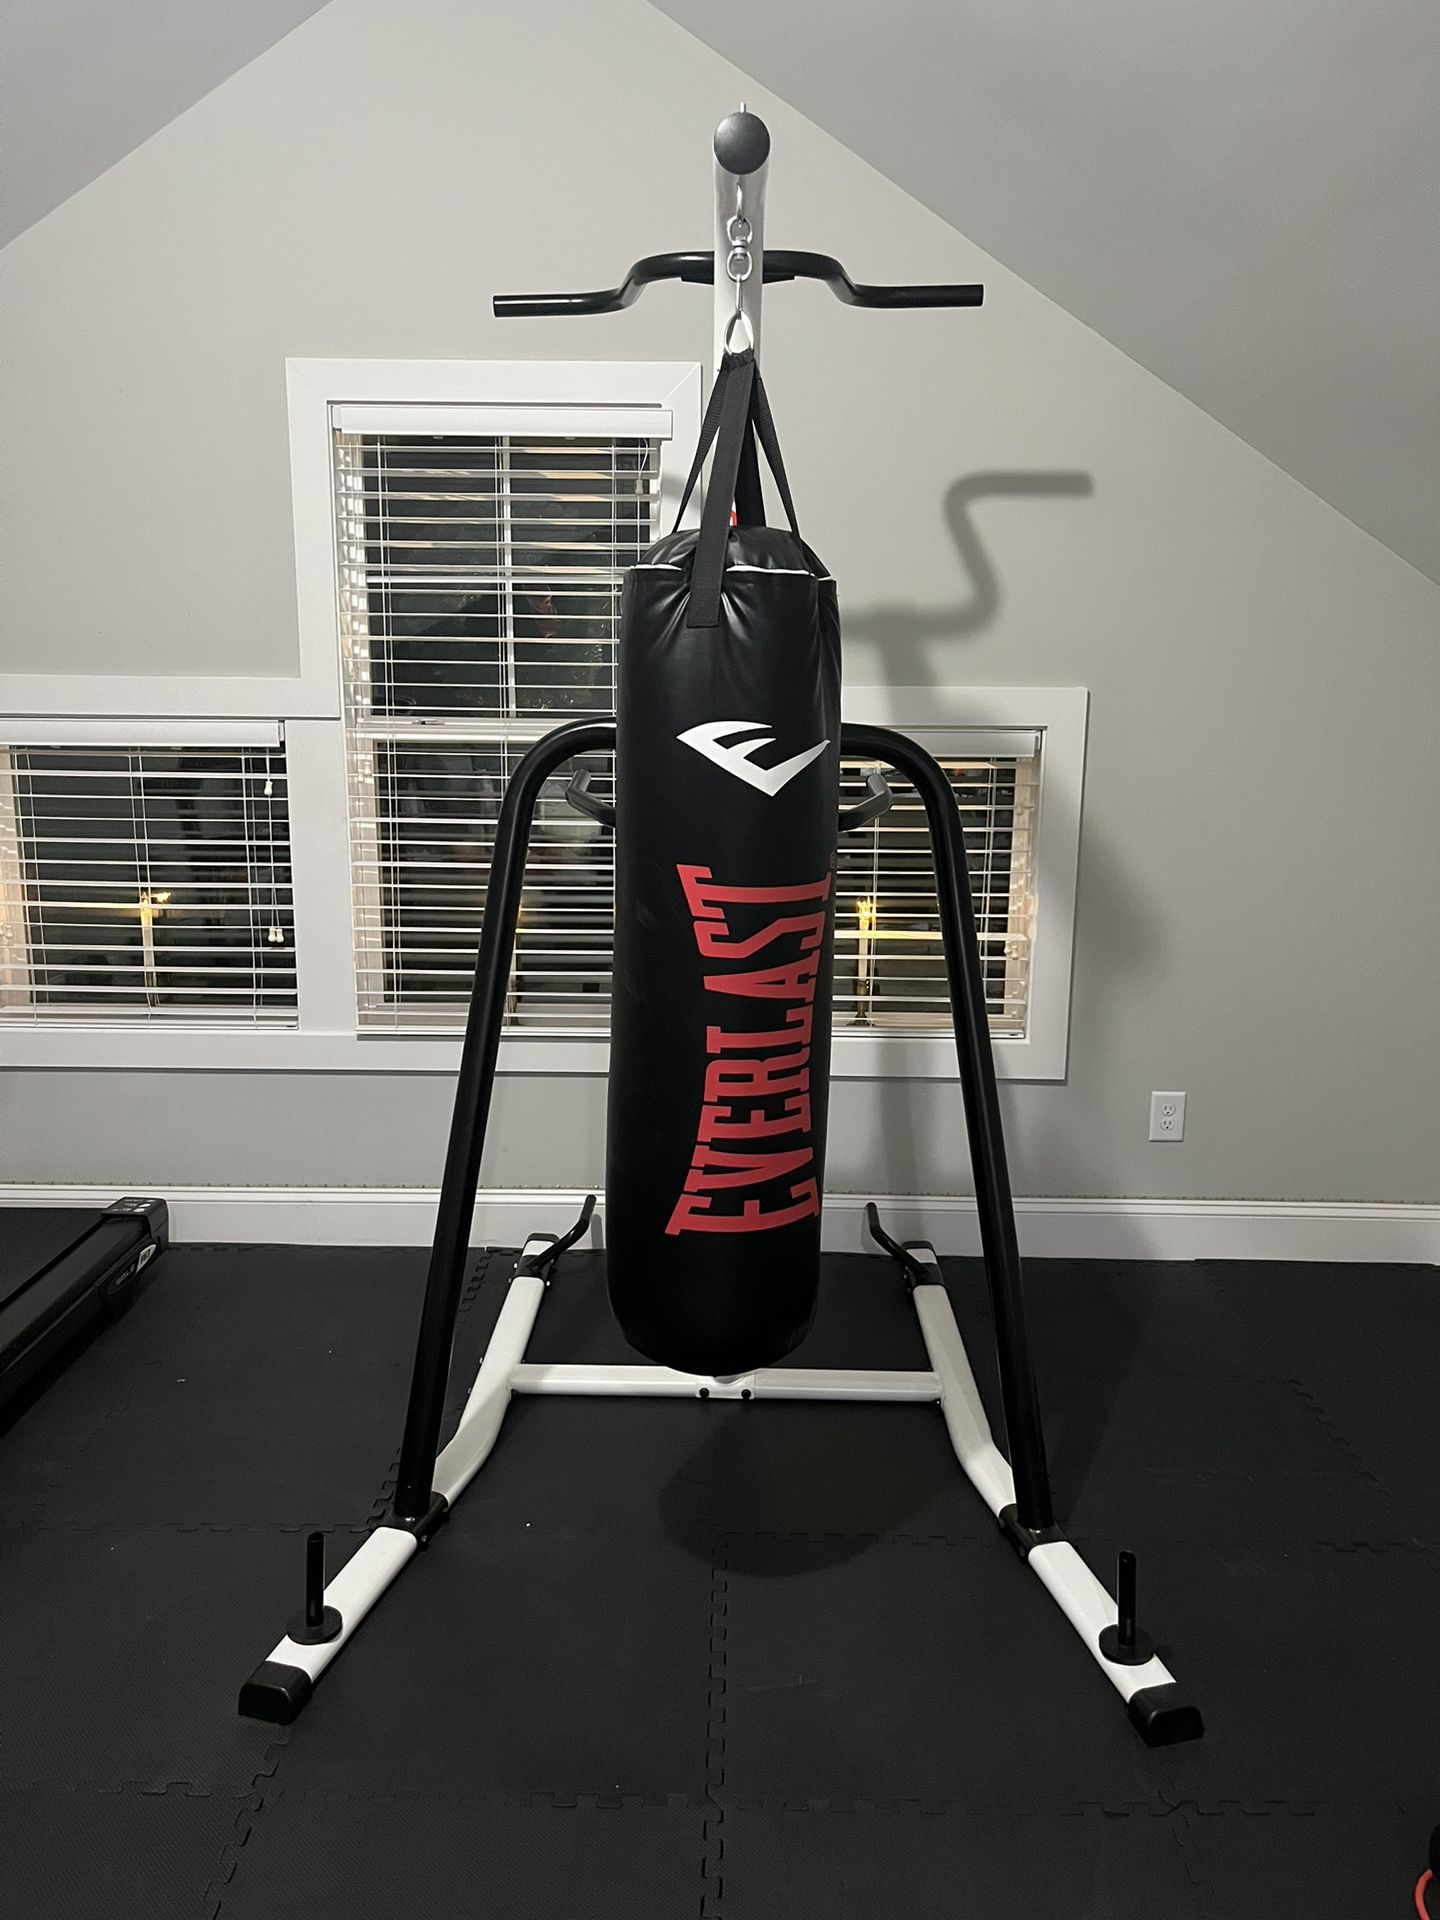 Century Stand With Everlast Punching Bag